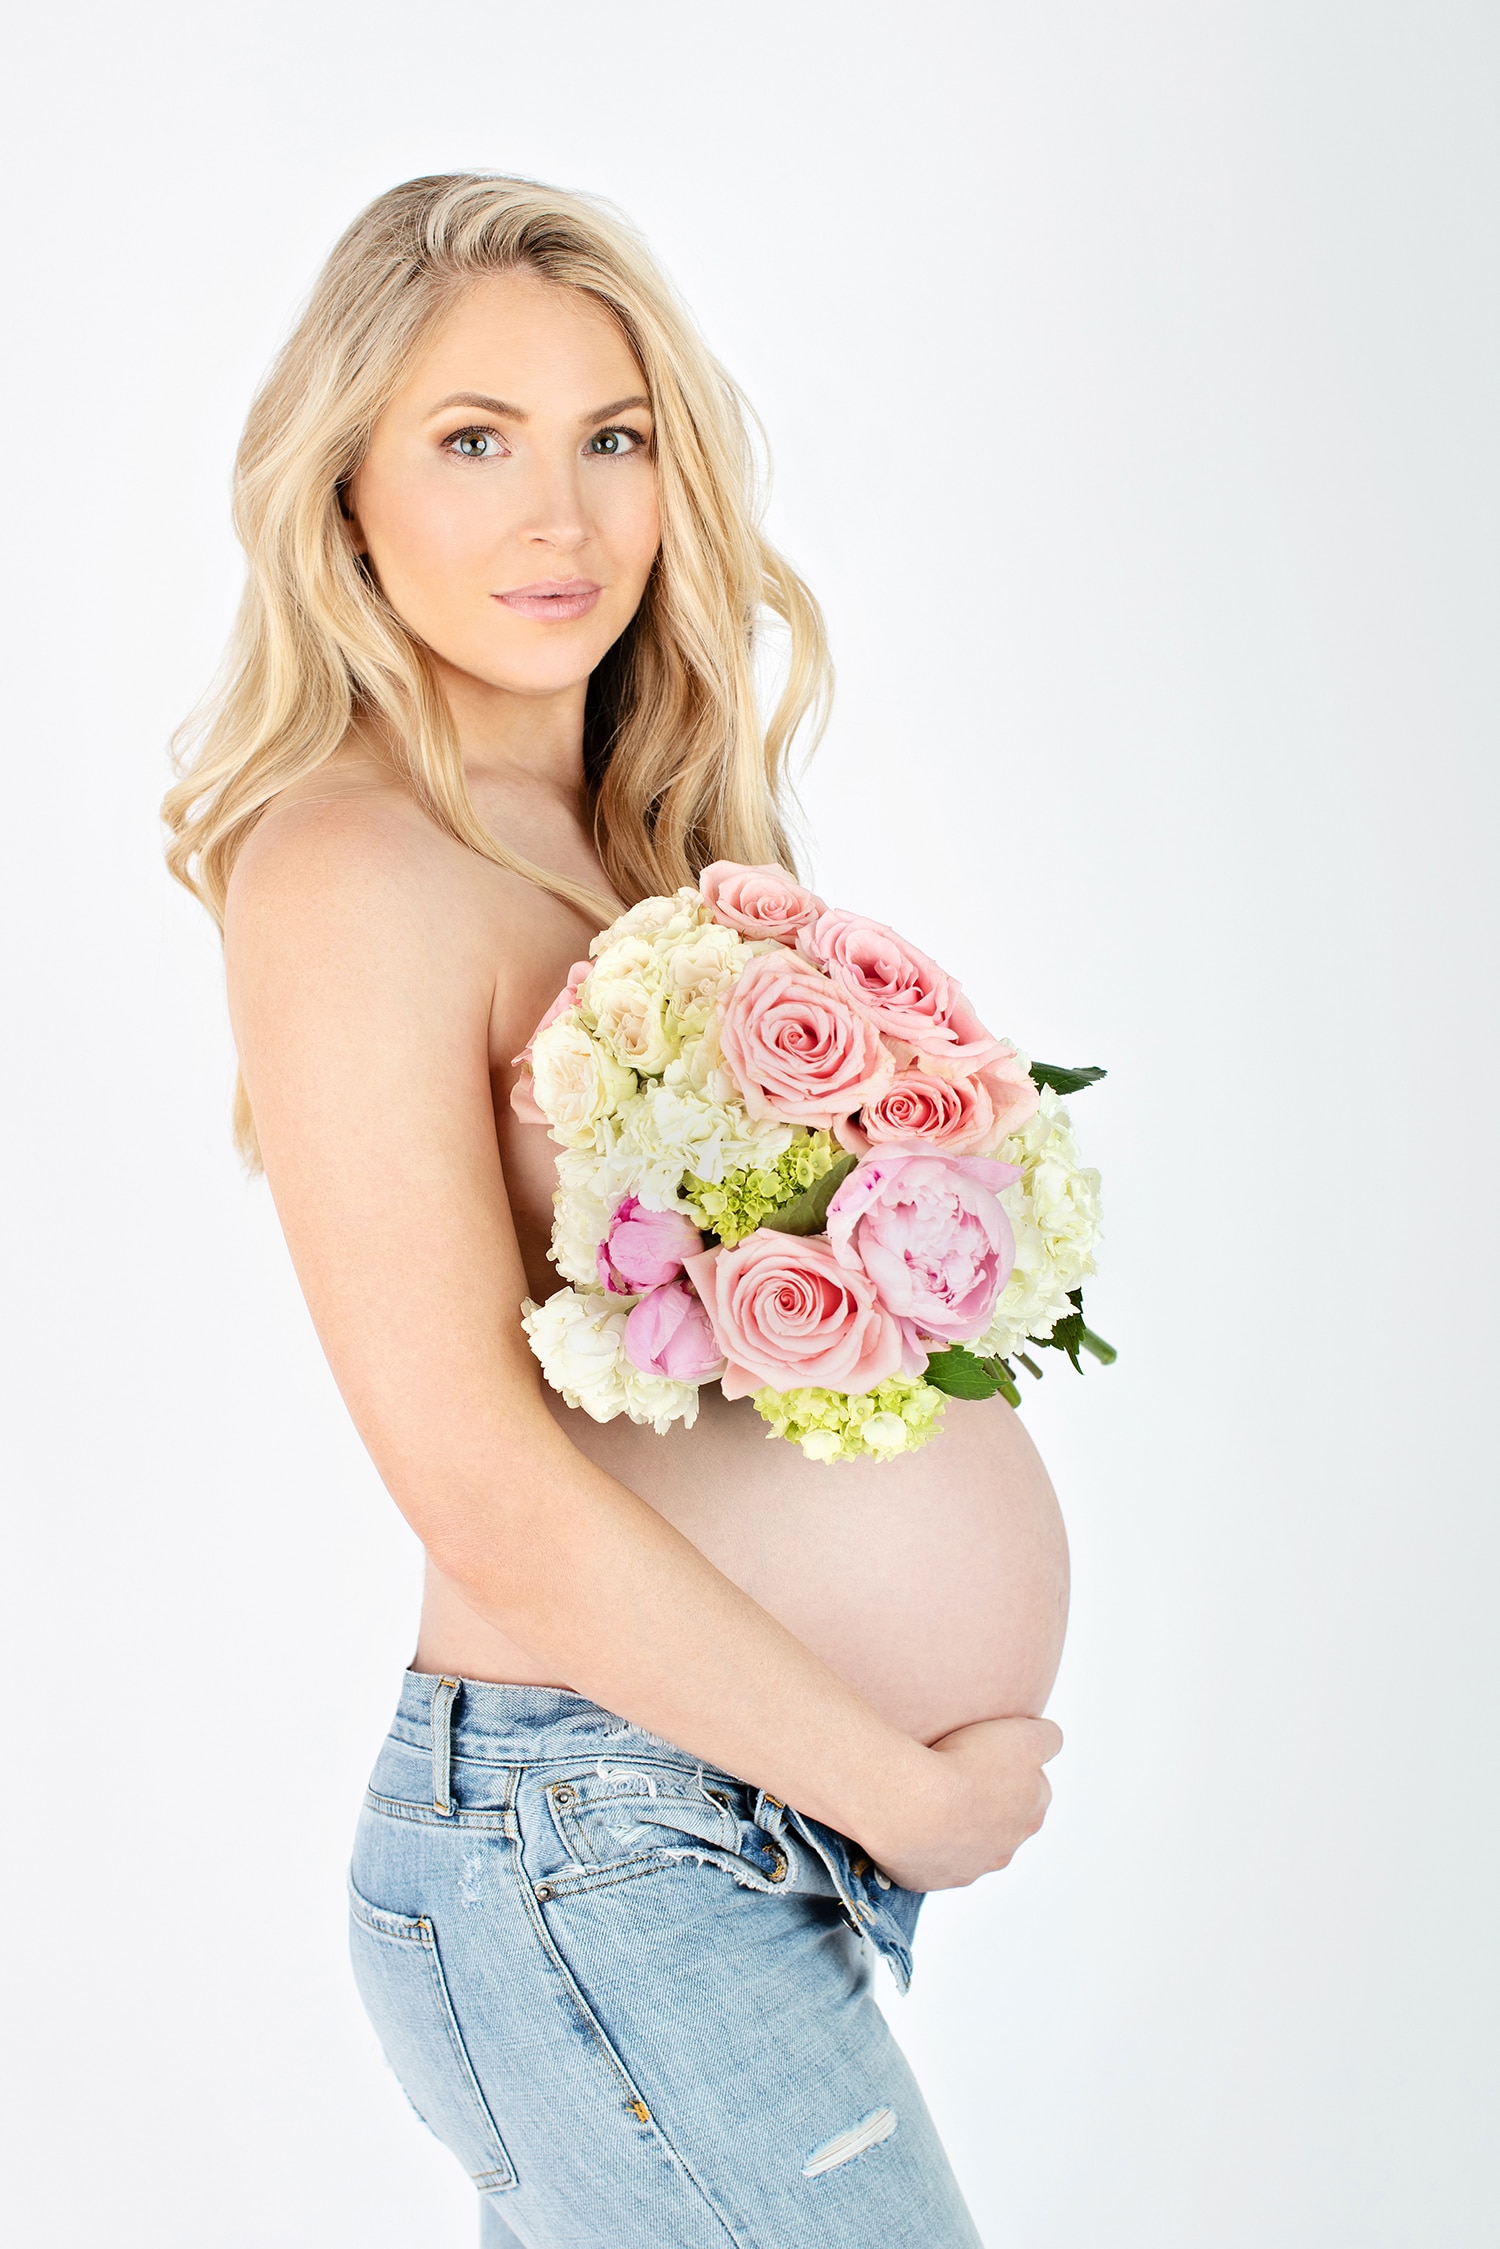 boudoir maternity photo of woman with flowers